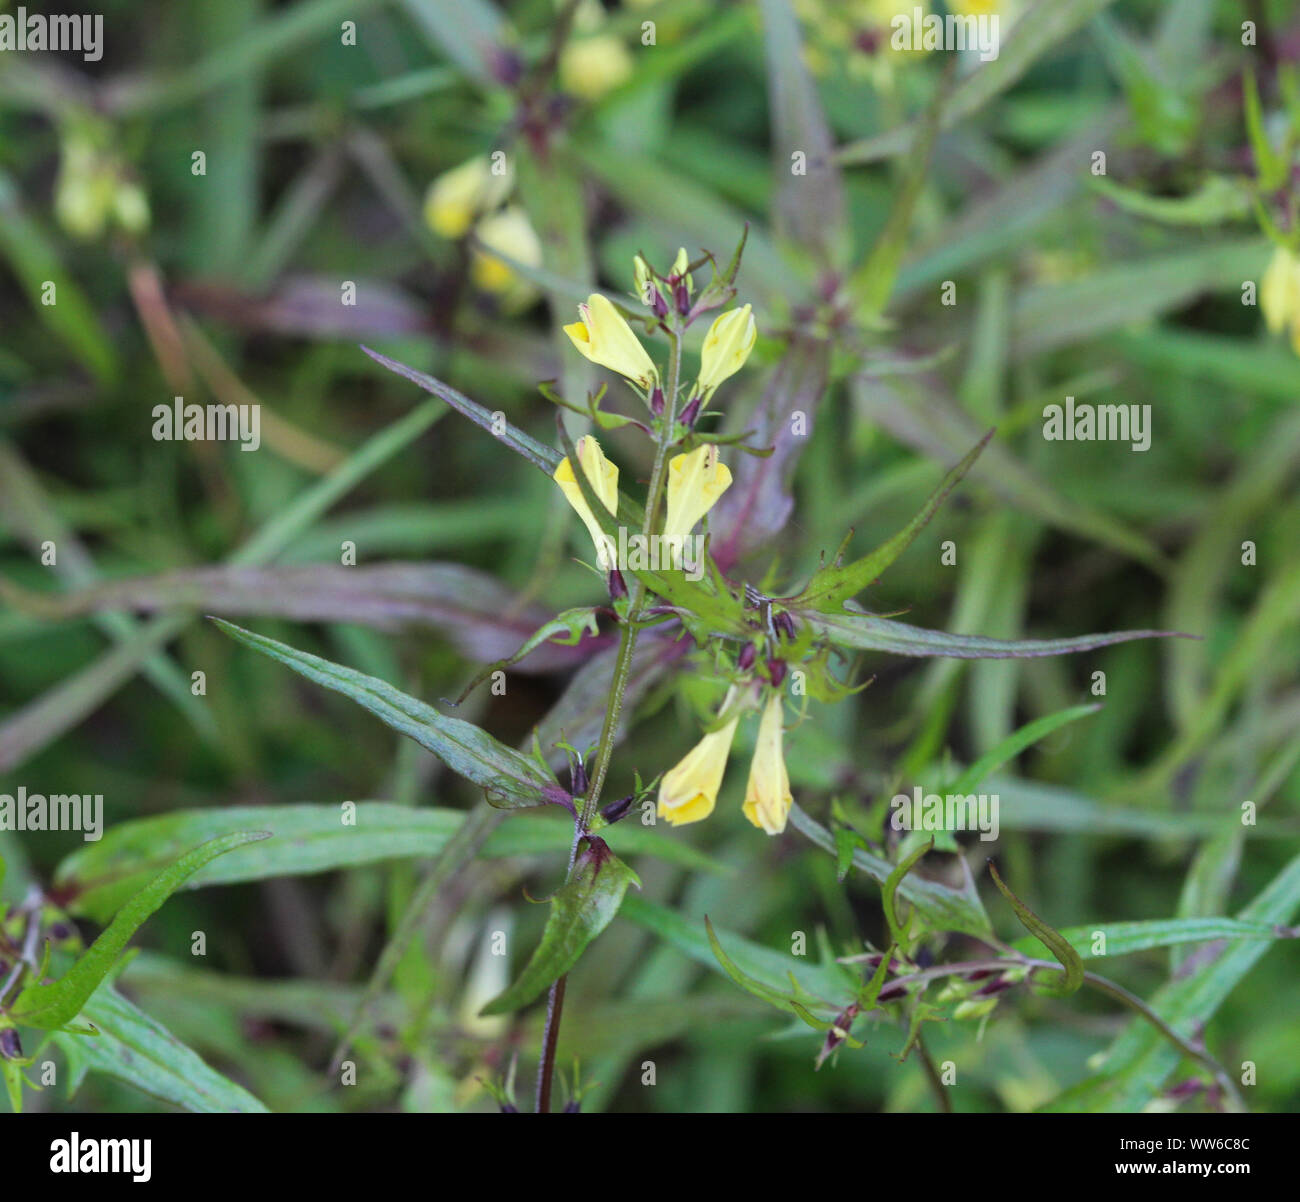 Close up of Melampyrum lineare, commonly called the narrowleaf cow wheat flower Stock Photo